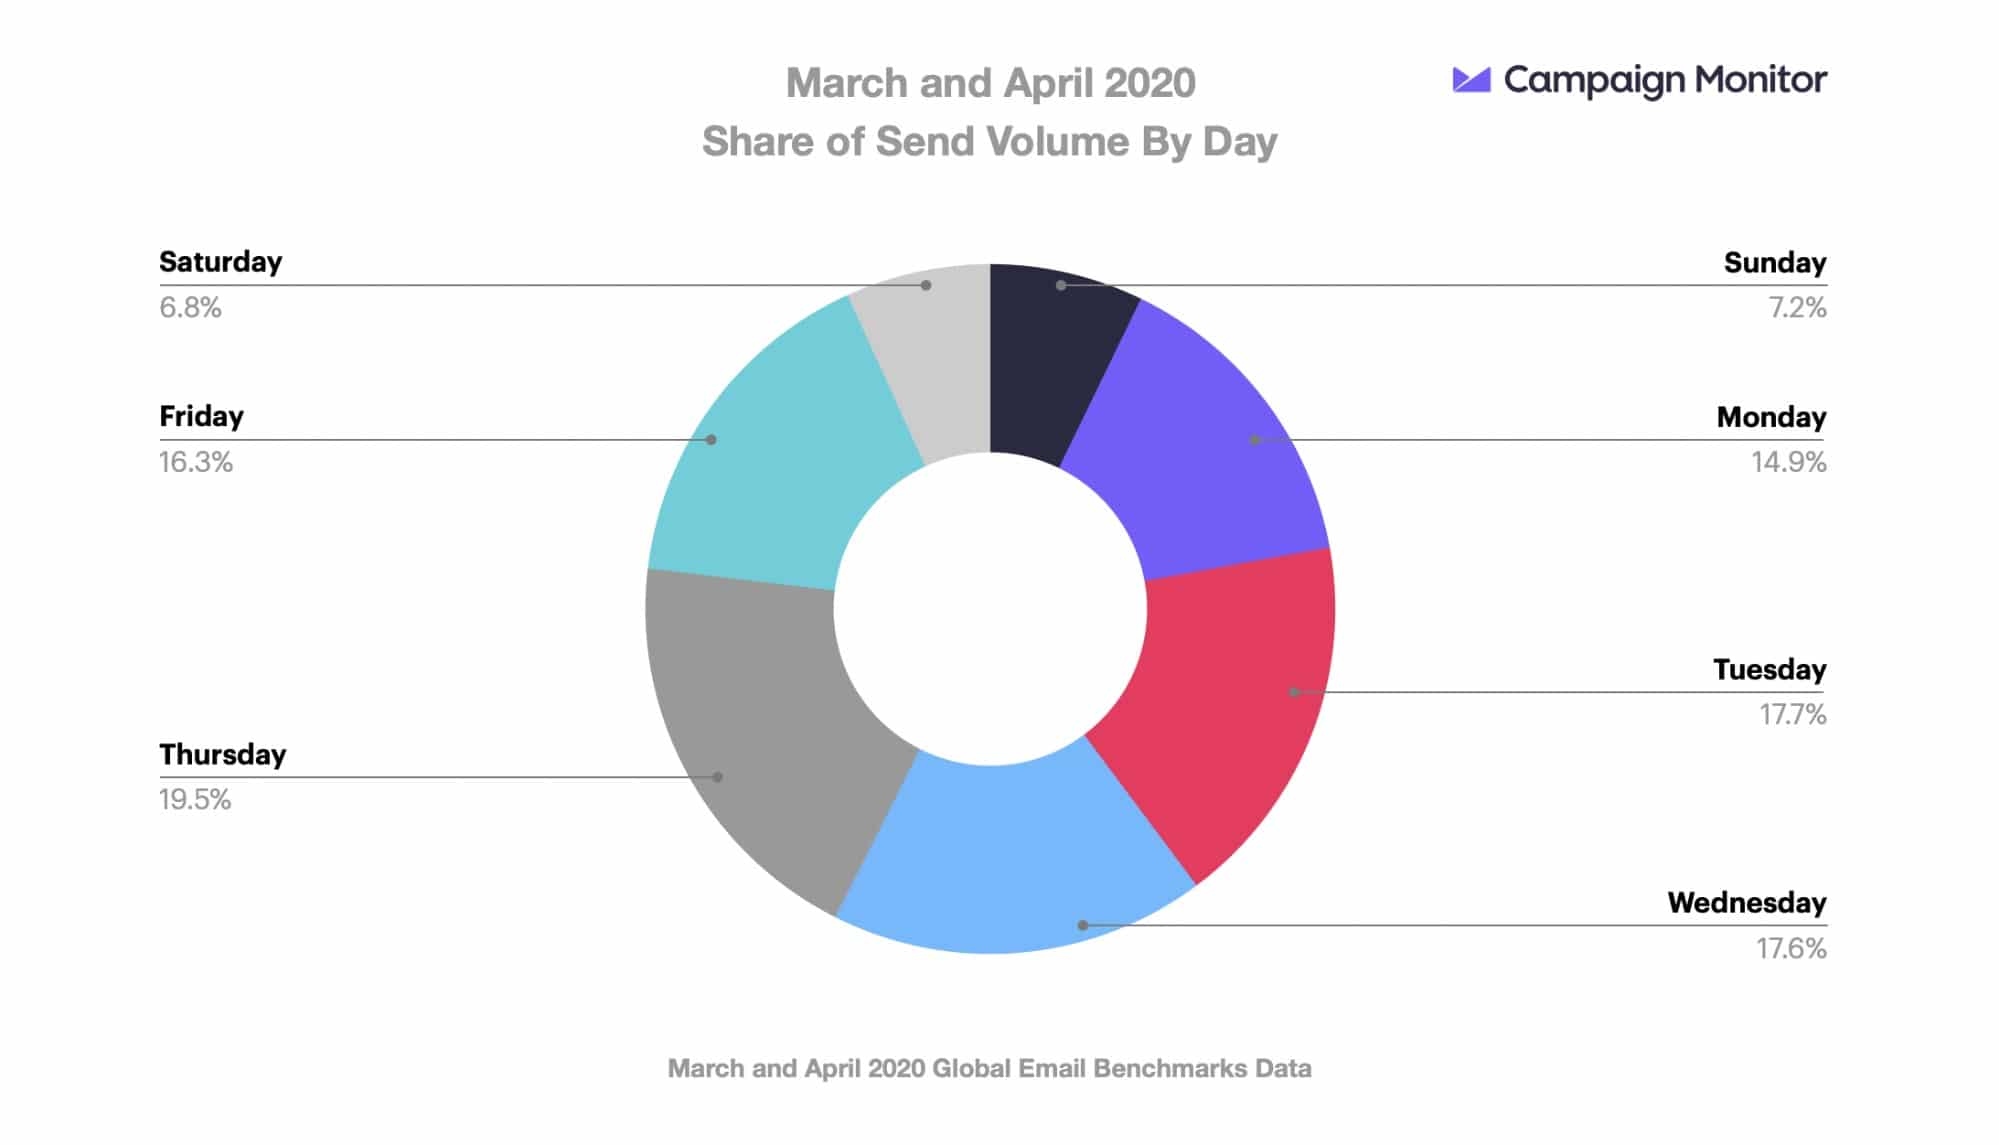 Share of Send Volumes for March and April during COVID-19